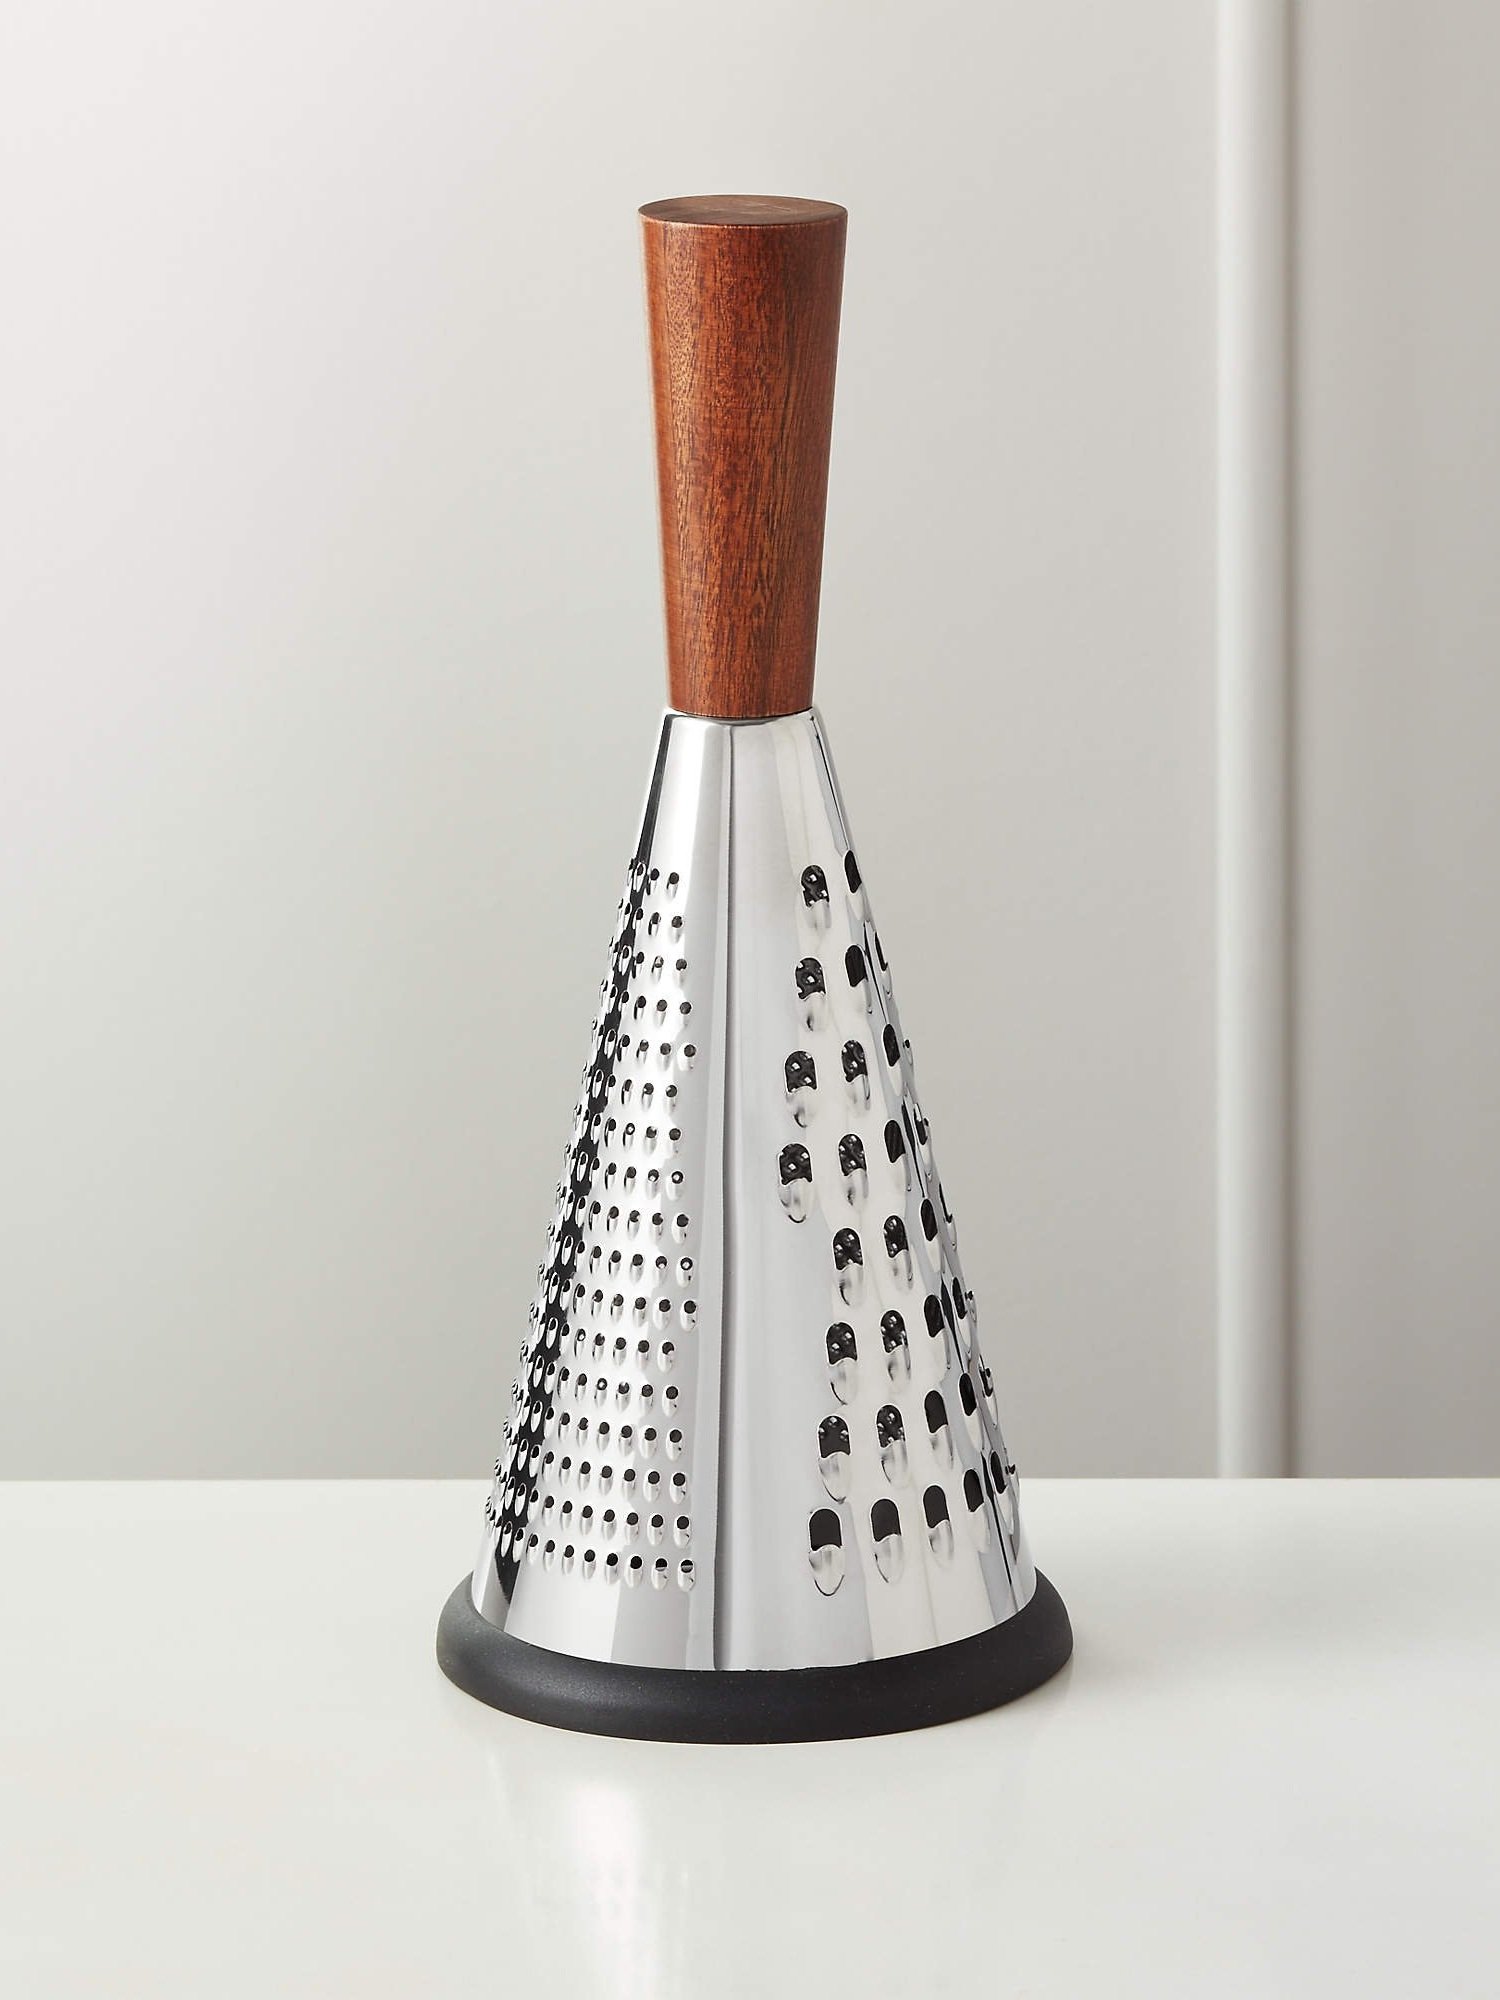 acacia-and-stainless-steel-cone-cheese-grater.jpg